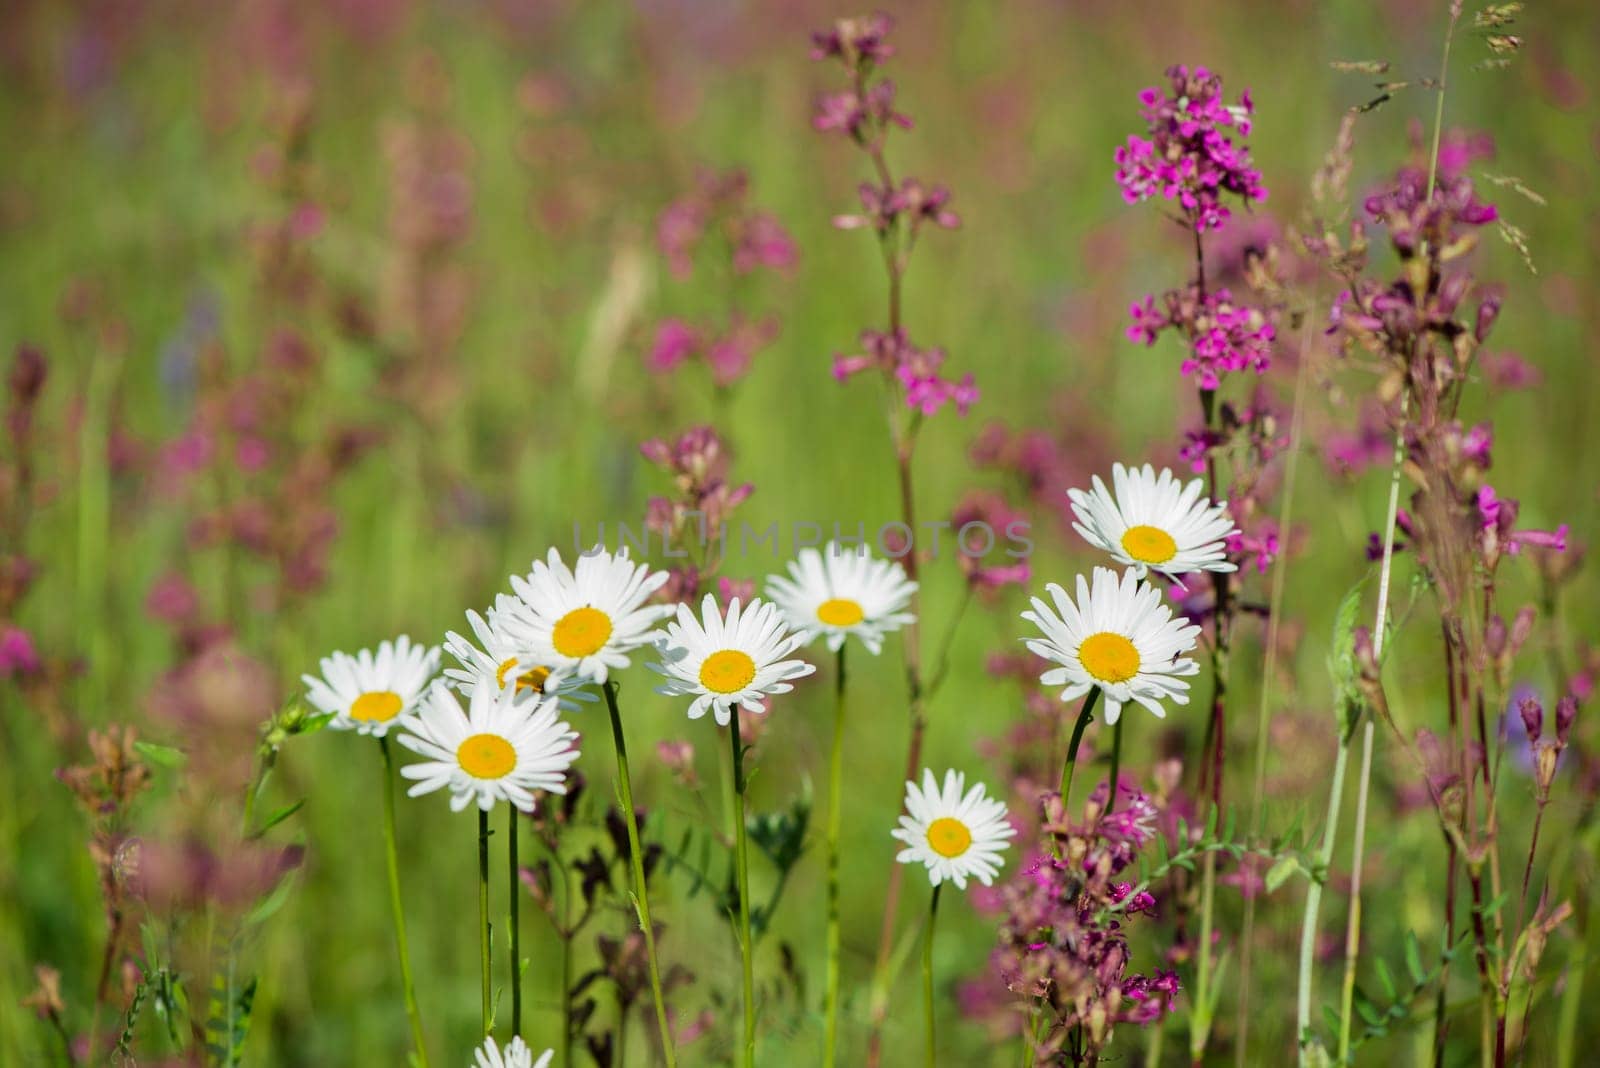 White daisies and pink herbs blossomed in the meadow. Ivan tea blooms among the forest on a sunny day in June.beautiful wildflowers background. summer nature. by aprilphoto